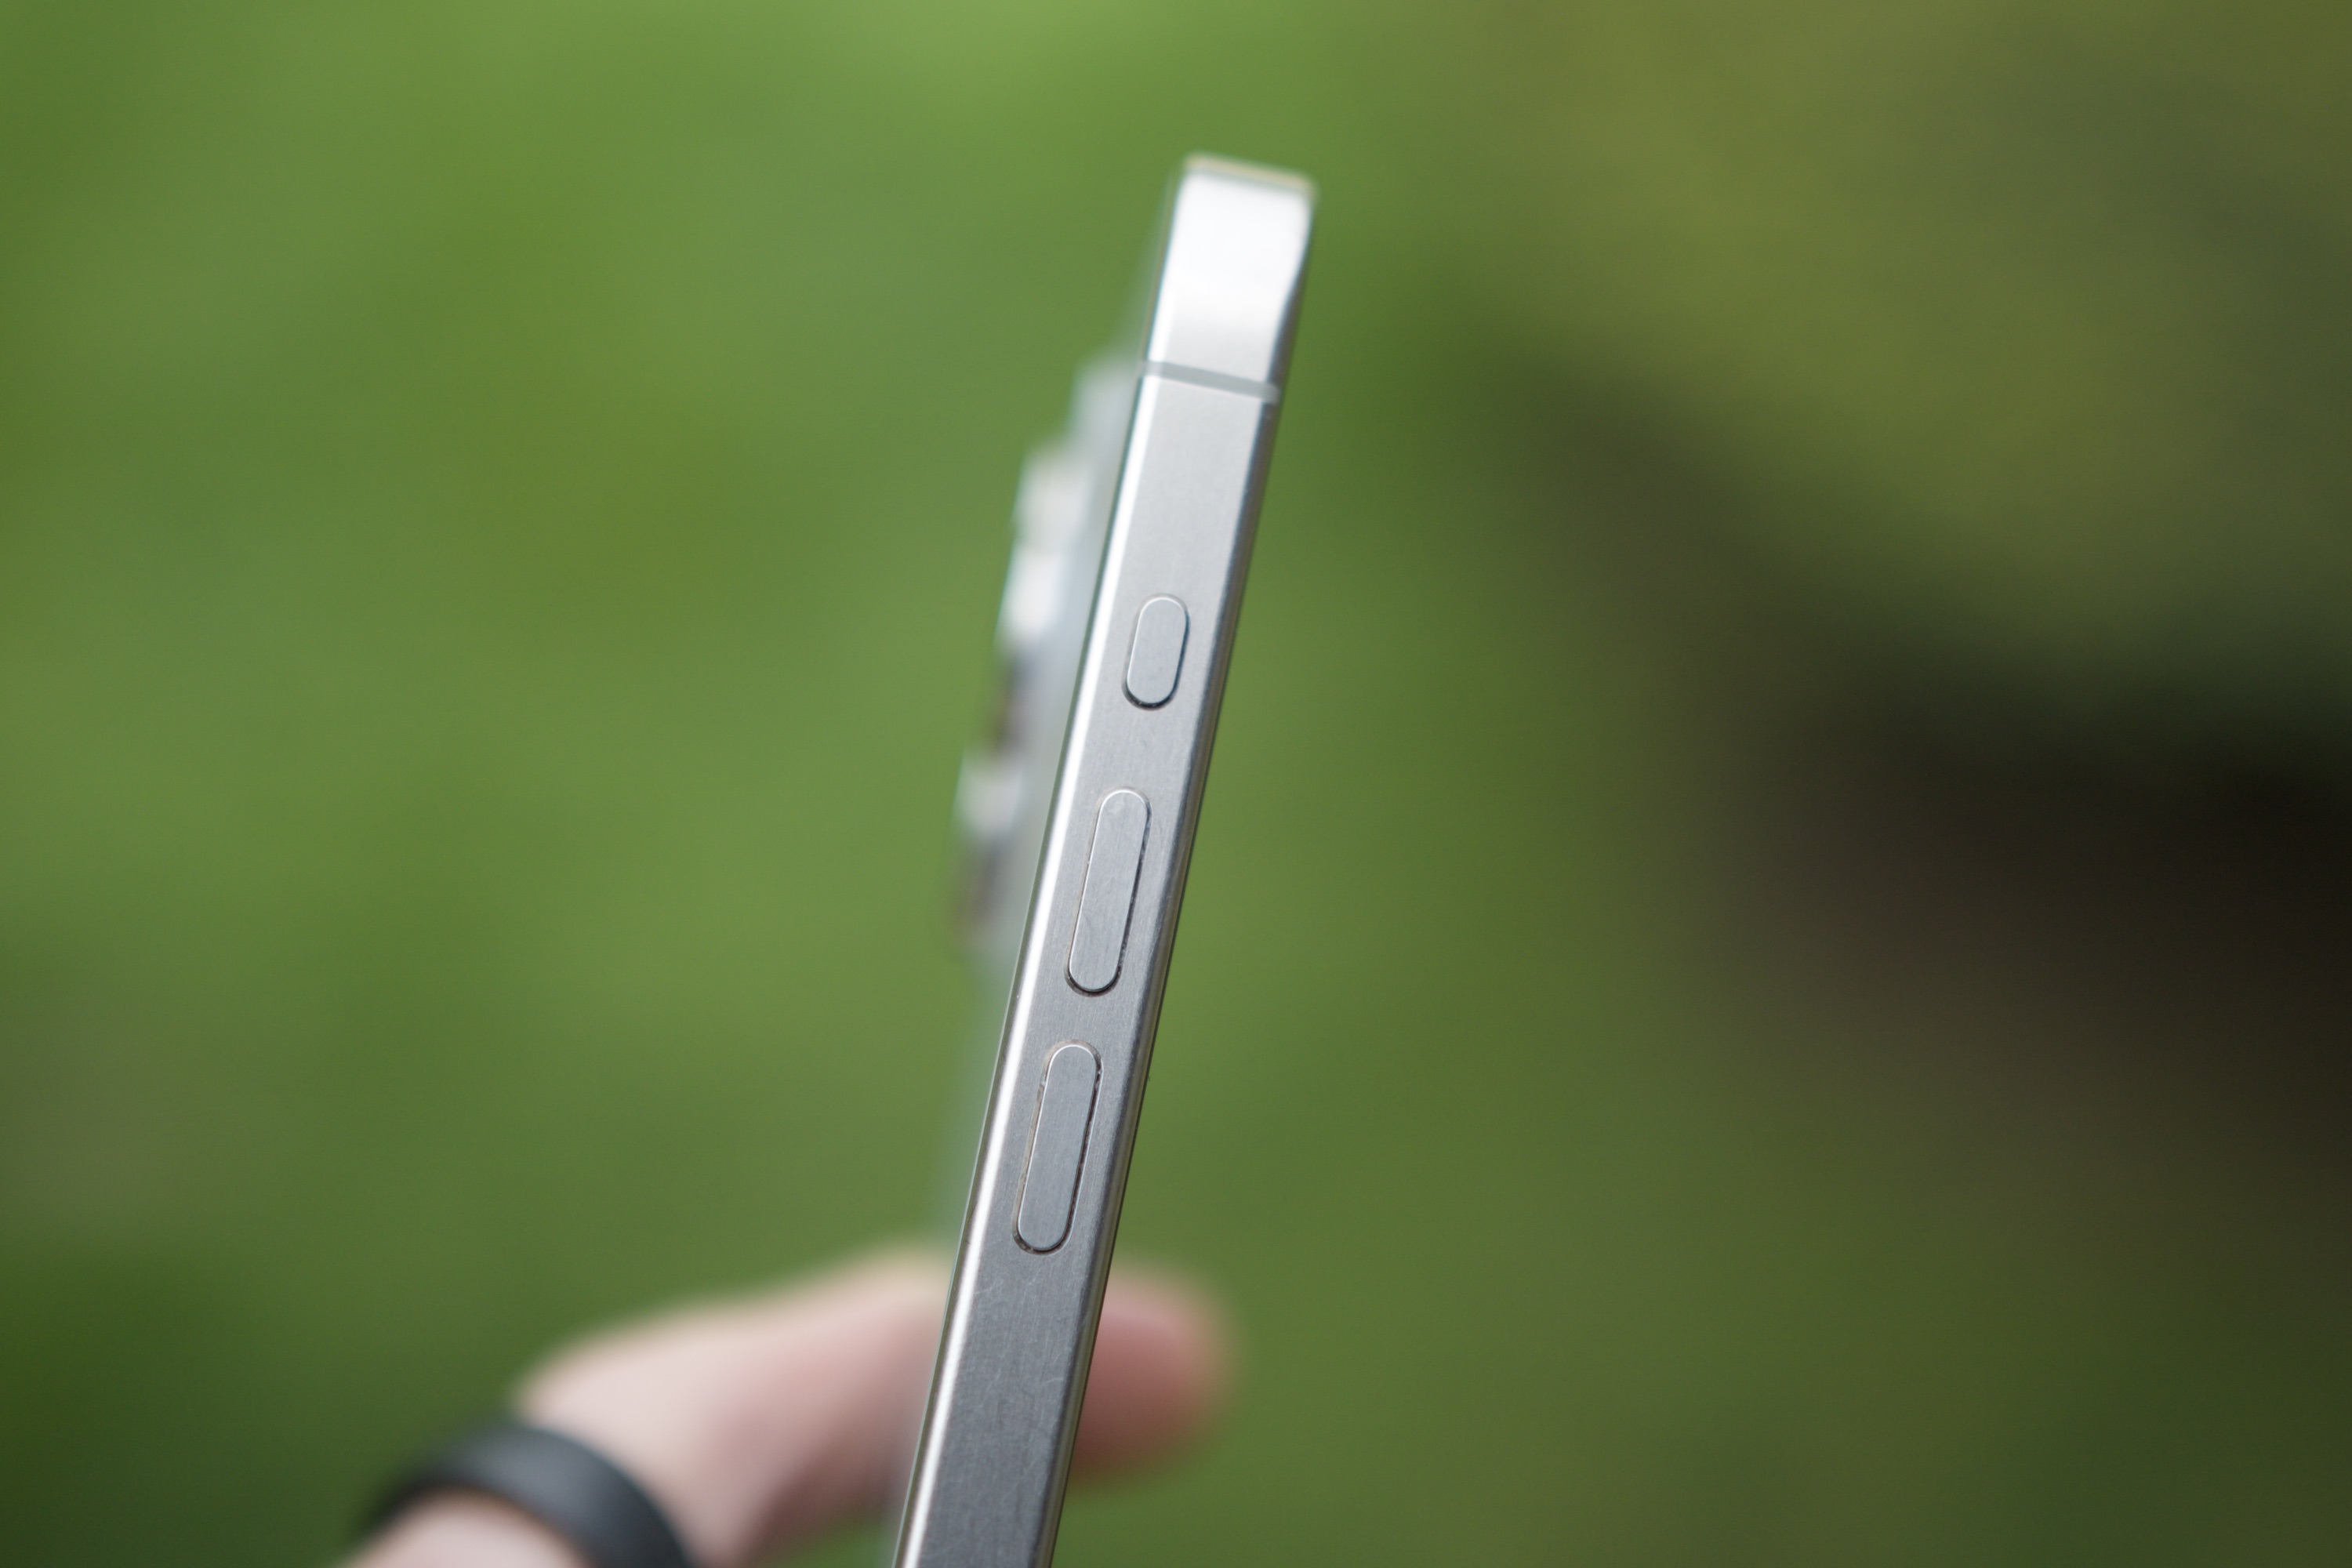 The side of an iPhone 15 Pro Max, showing its Action button.